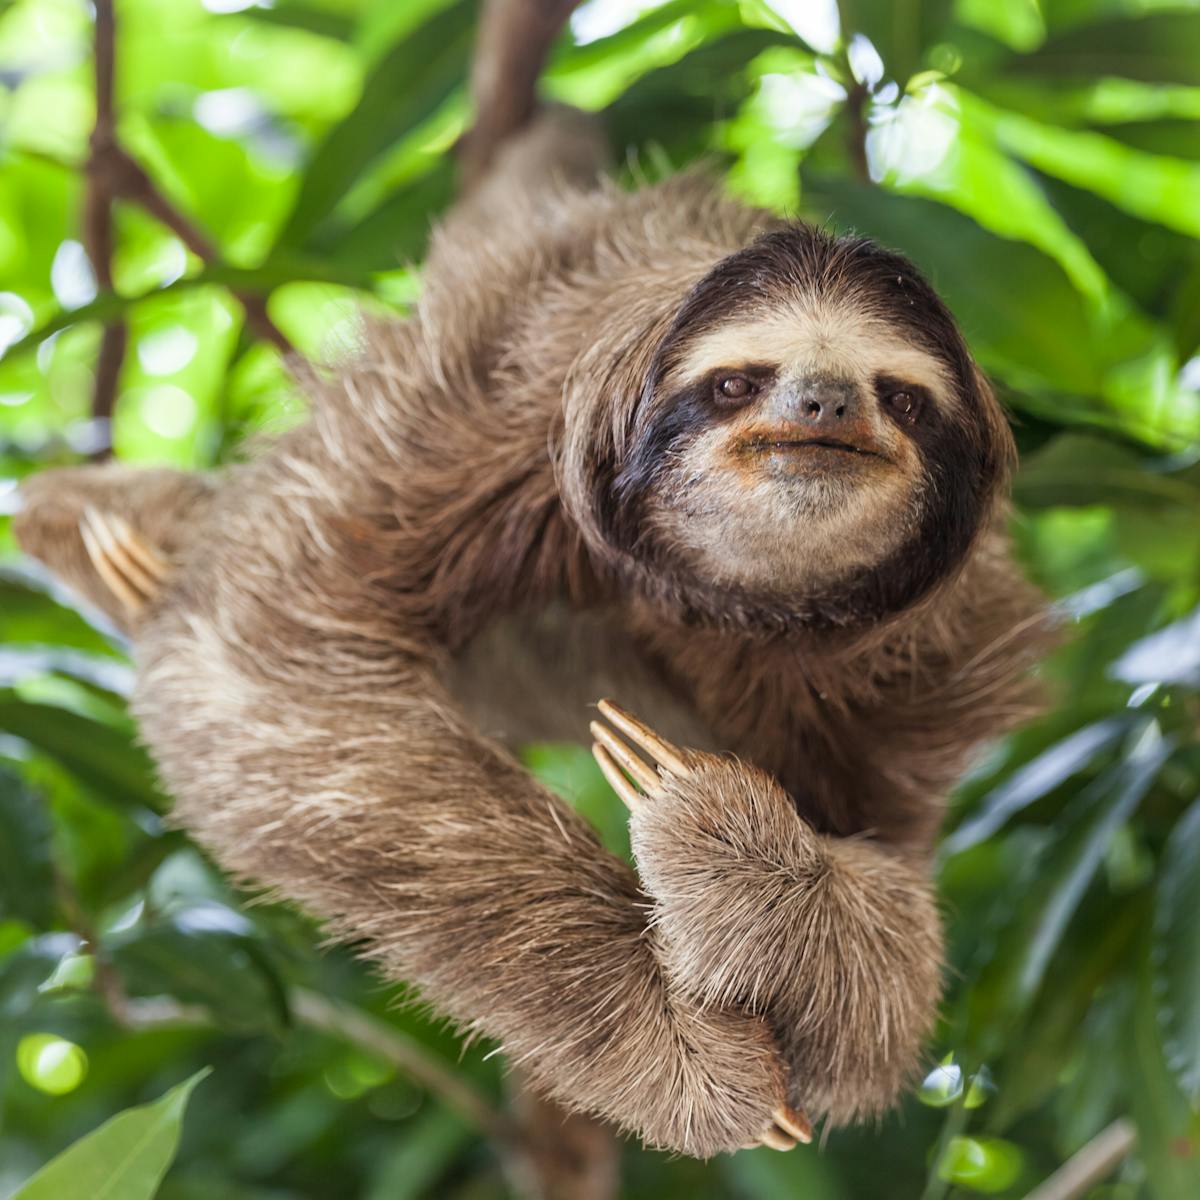 Sloths are far more adaptable than we realised